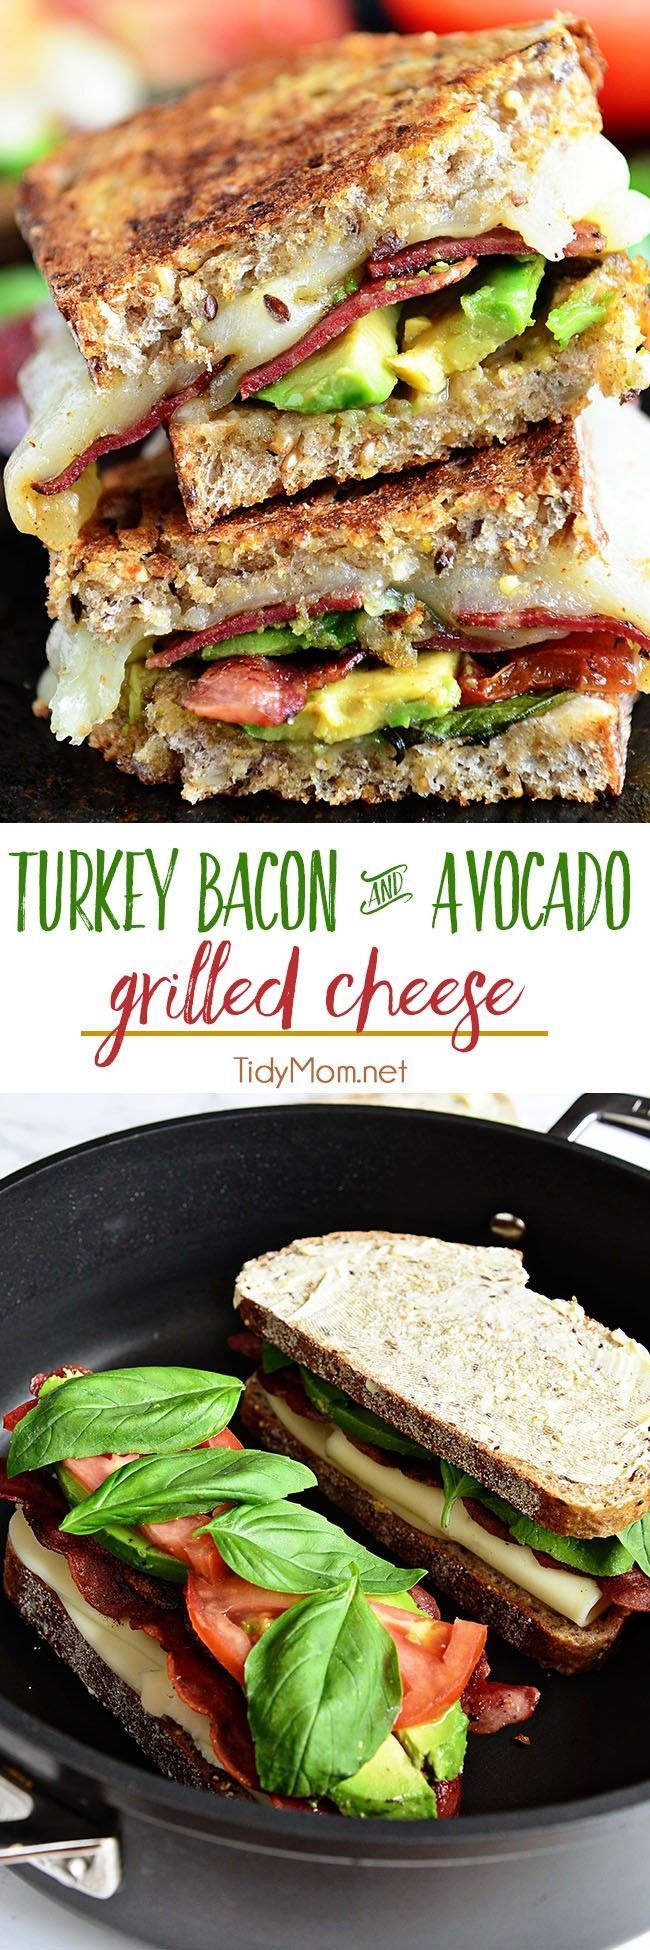 Turkey Bacon and Avocado Grilled Cheese sandwich loaded with fresh basil, tomatoes and mozzarella cheese on a hearty artisan